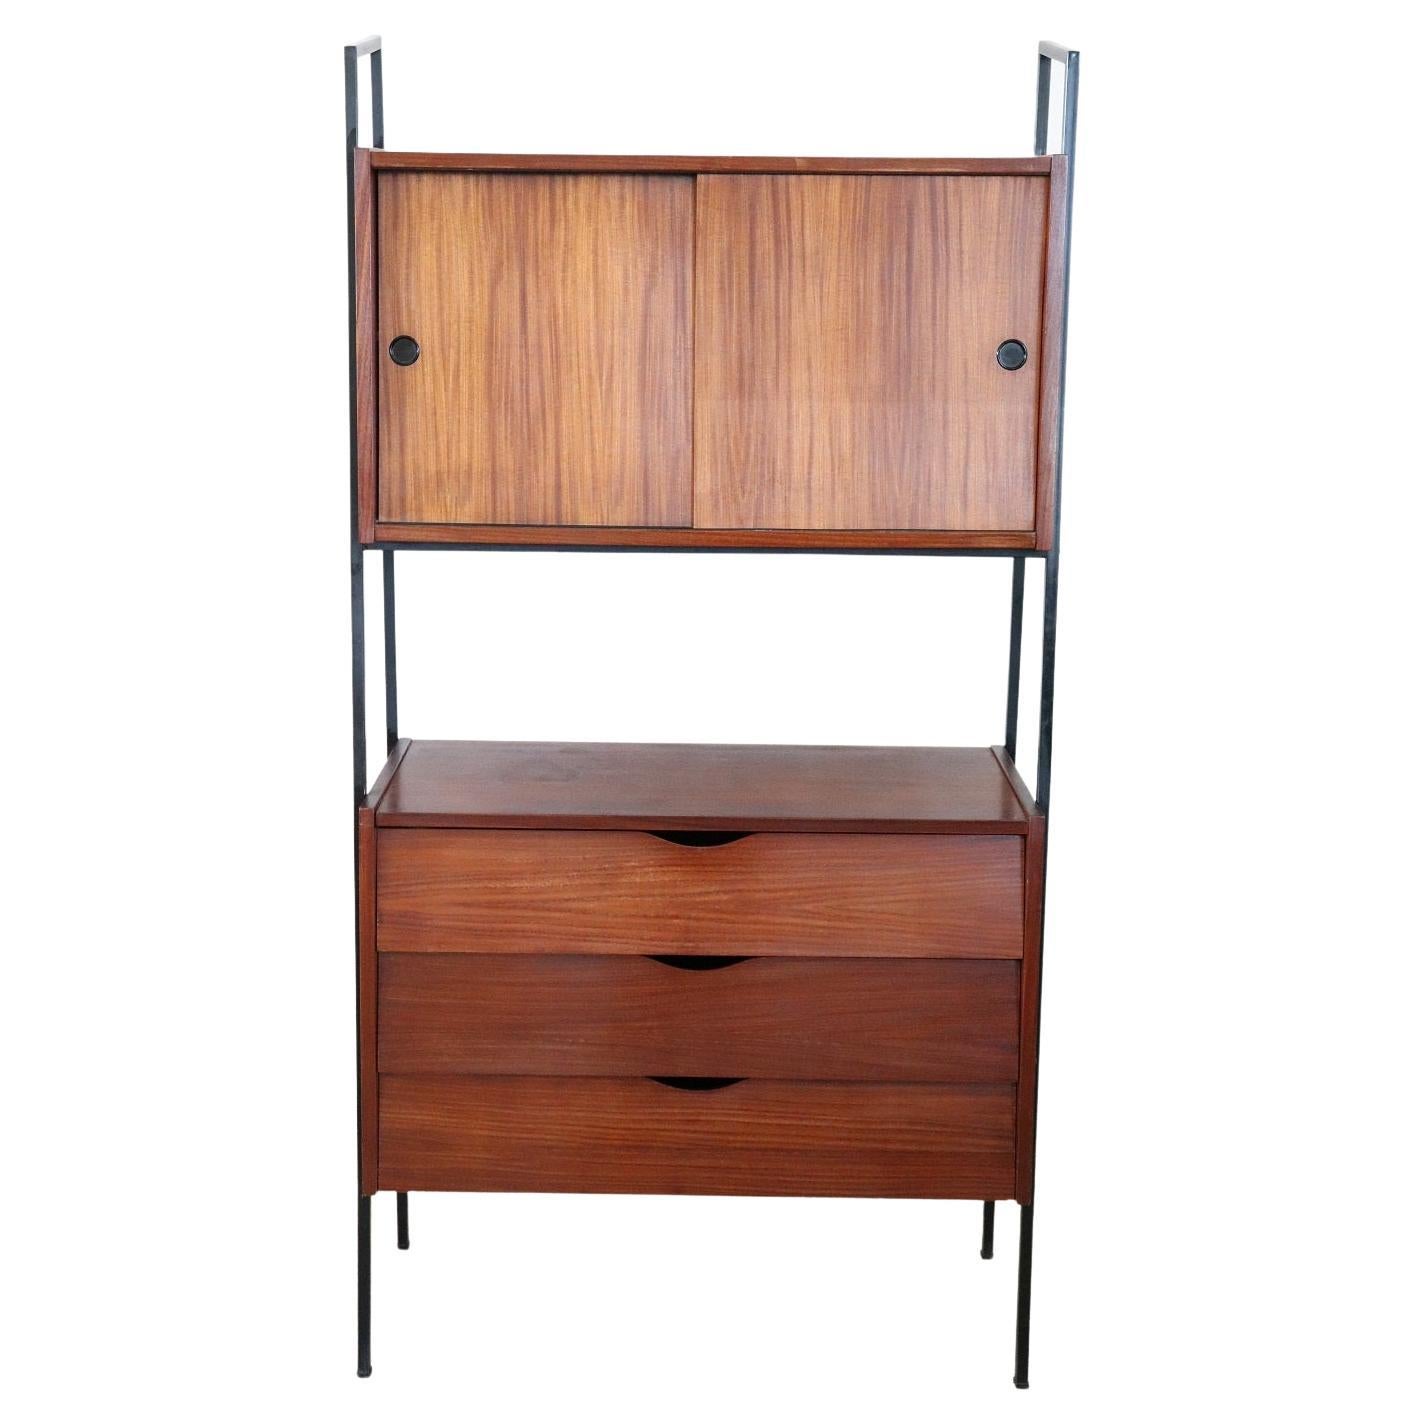 20th Century Italian Design Shoe Cabinet in Teak and Iron, 1960s For Sale